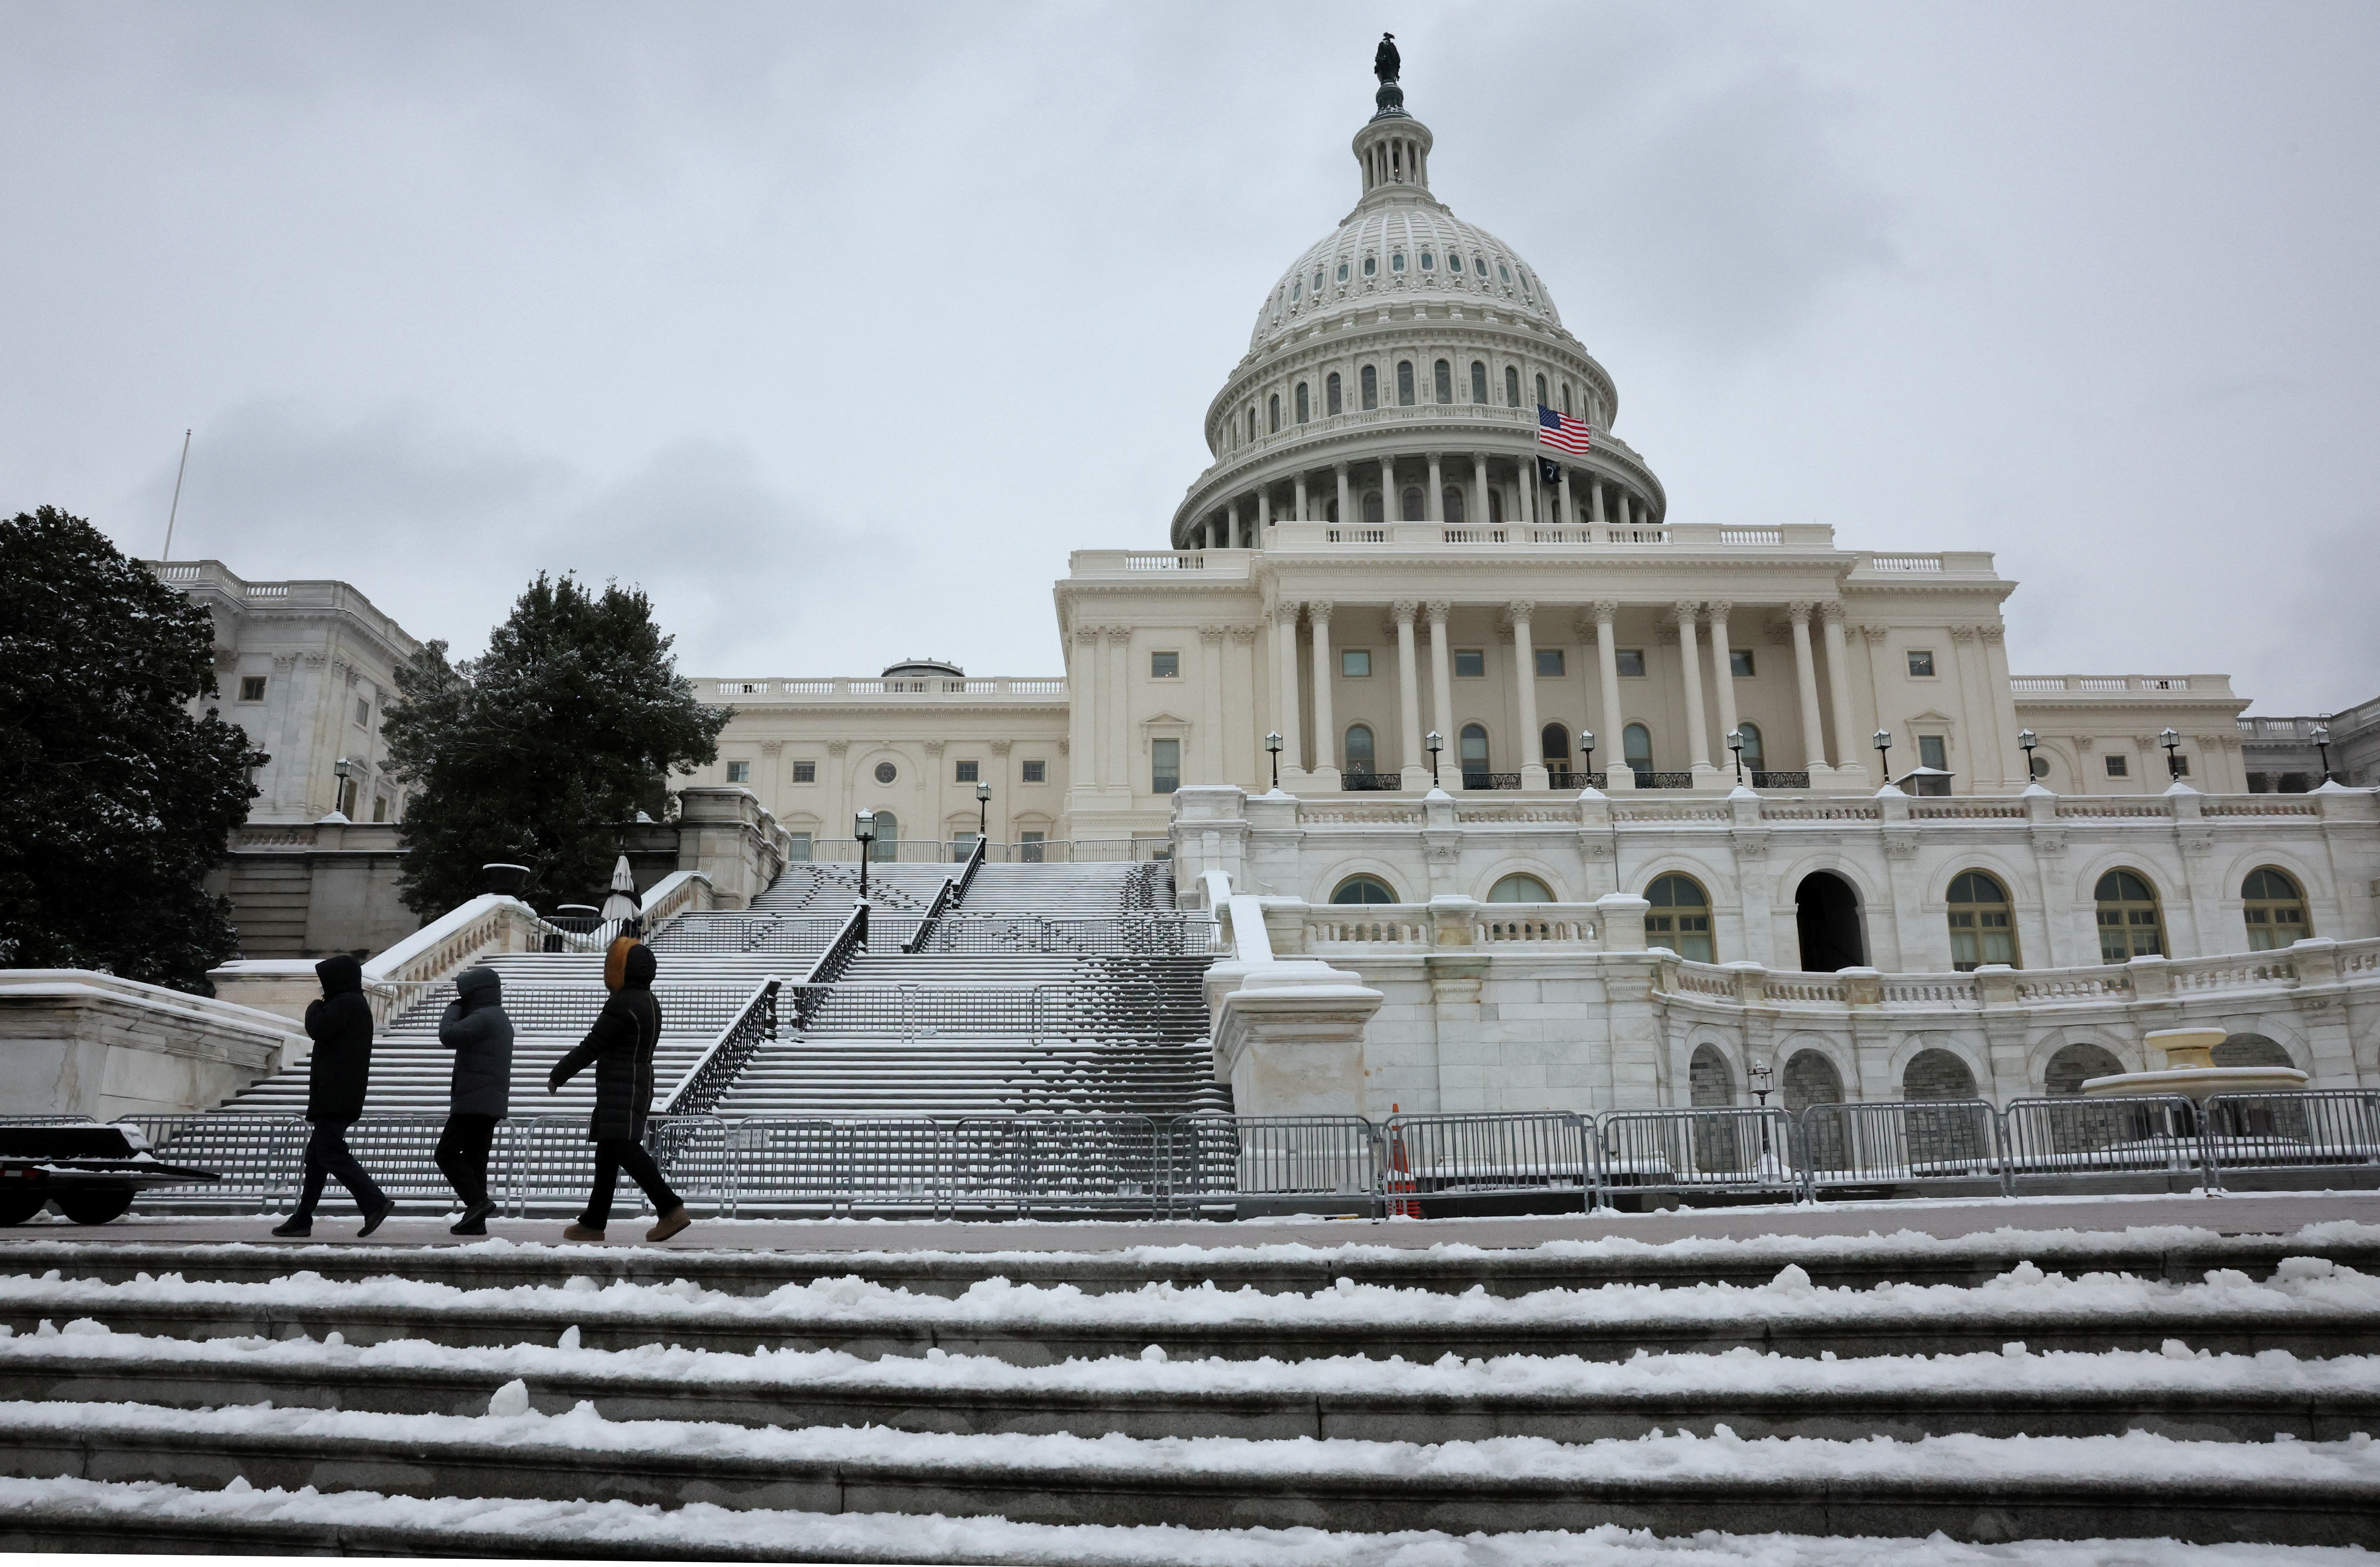 Scenes from a snow day on the hill in Washington, U.S.